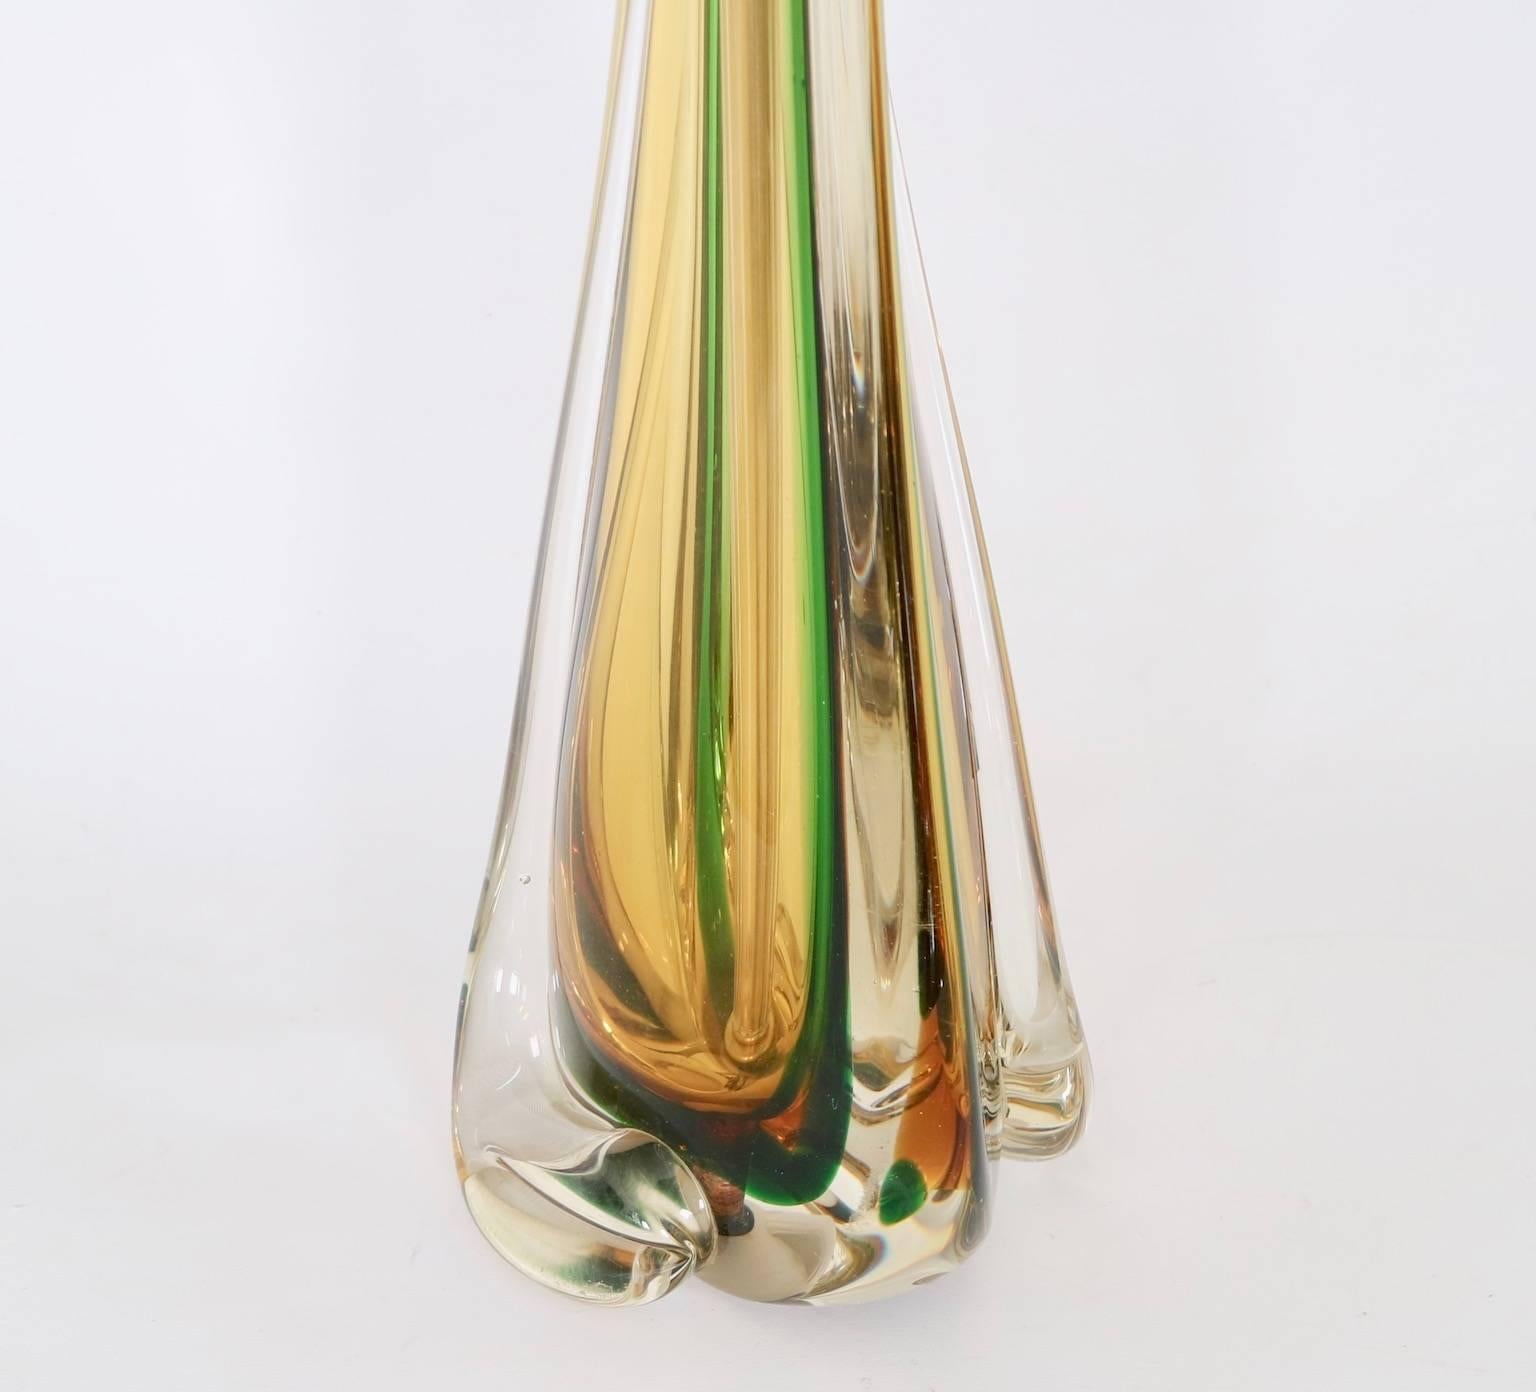 Hollywood Regency Murano Glass Lamp by Seguso in Green and Amber